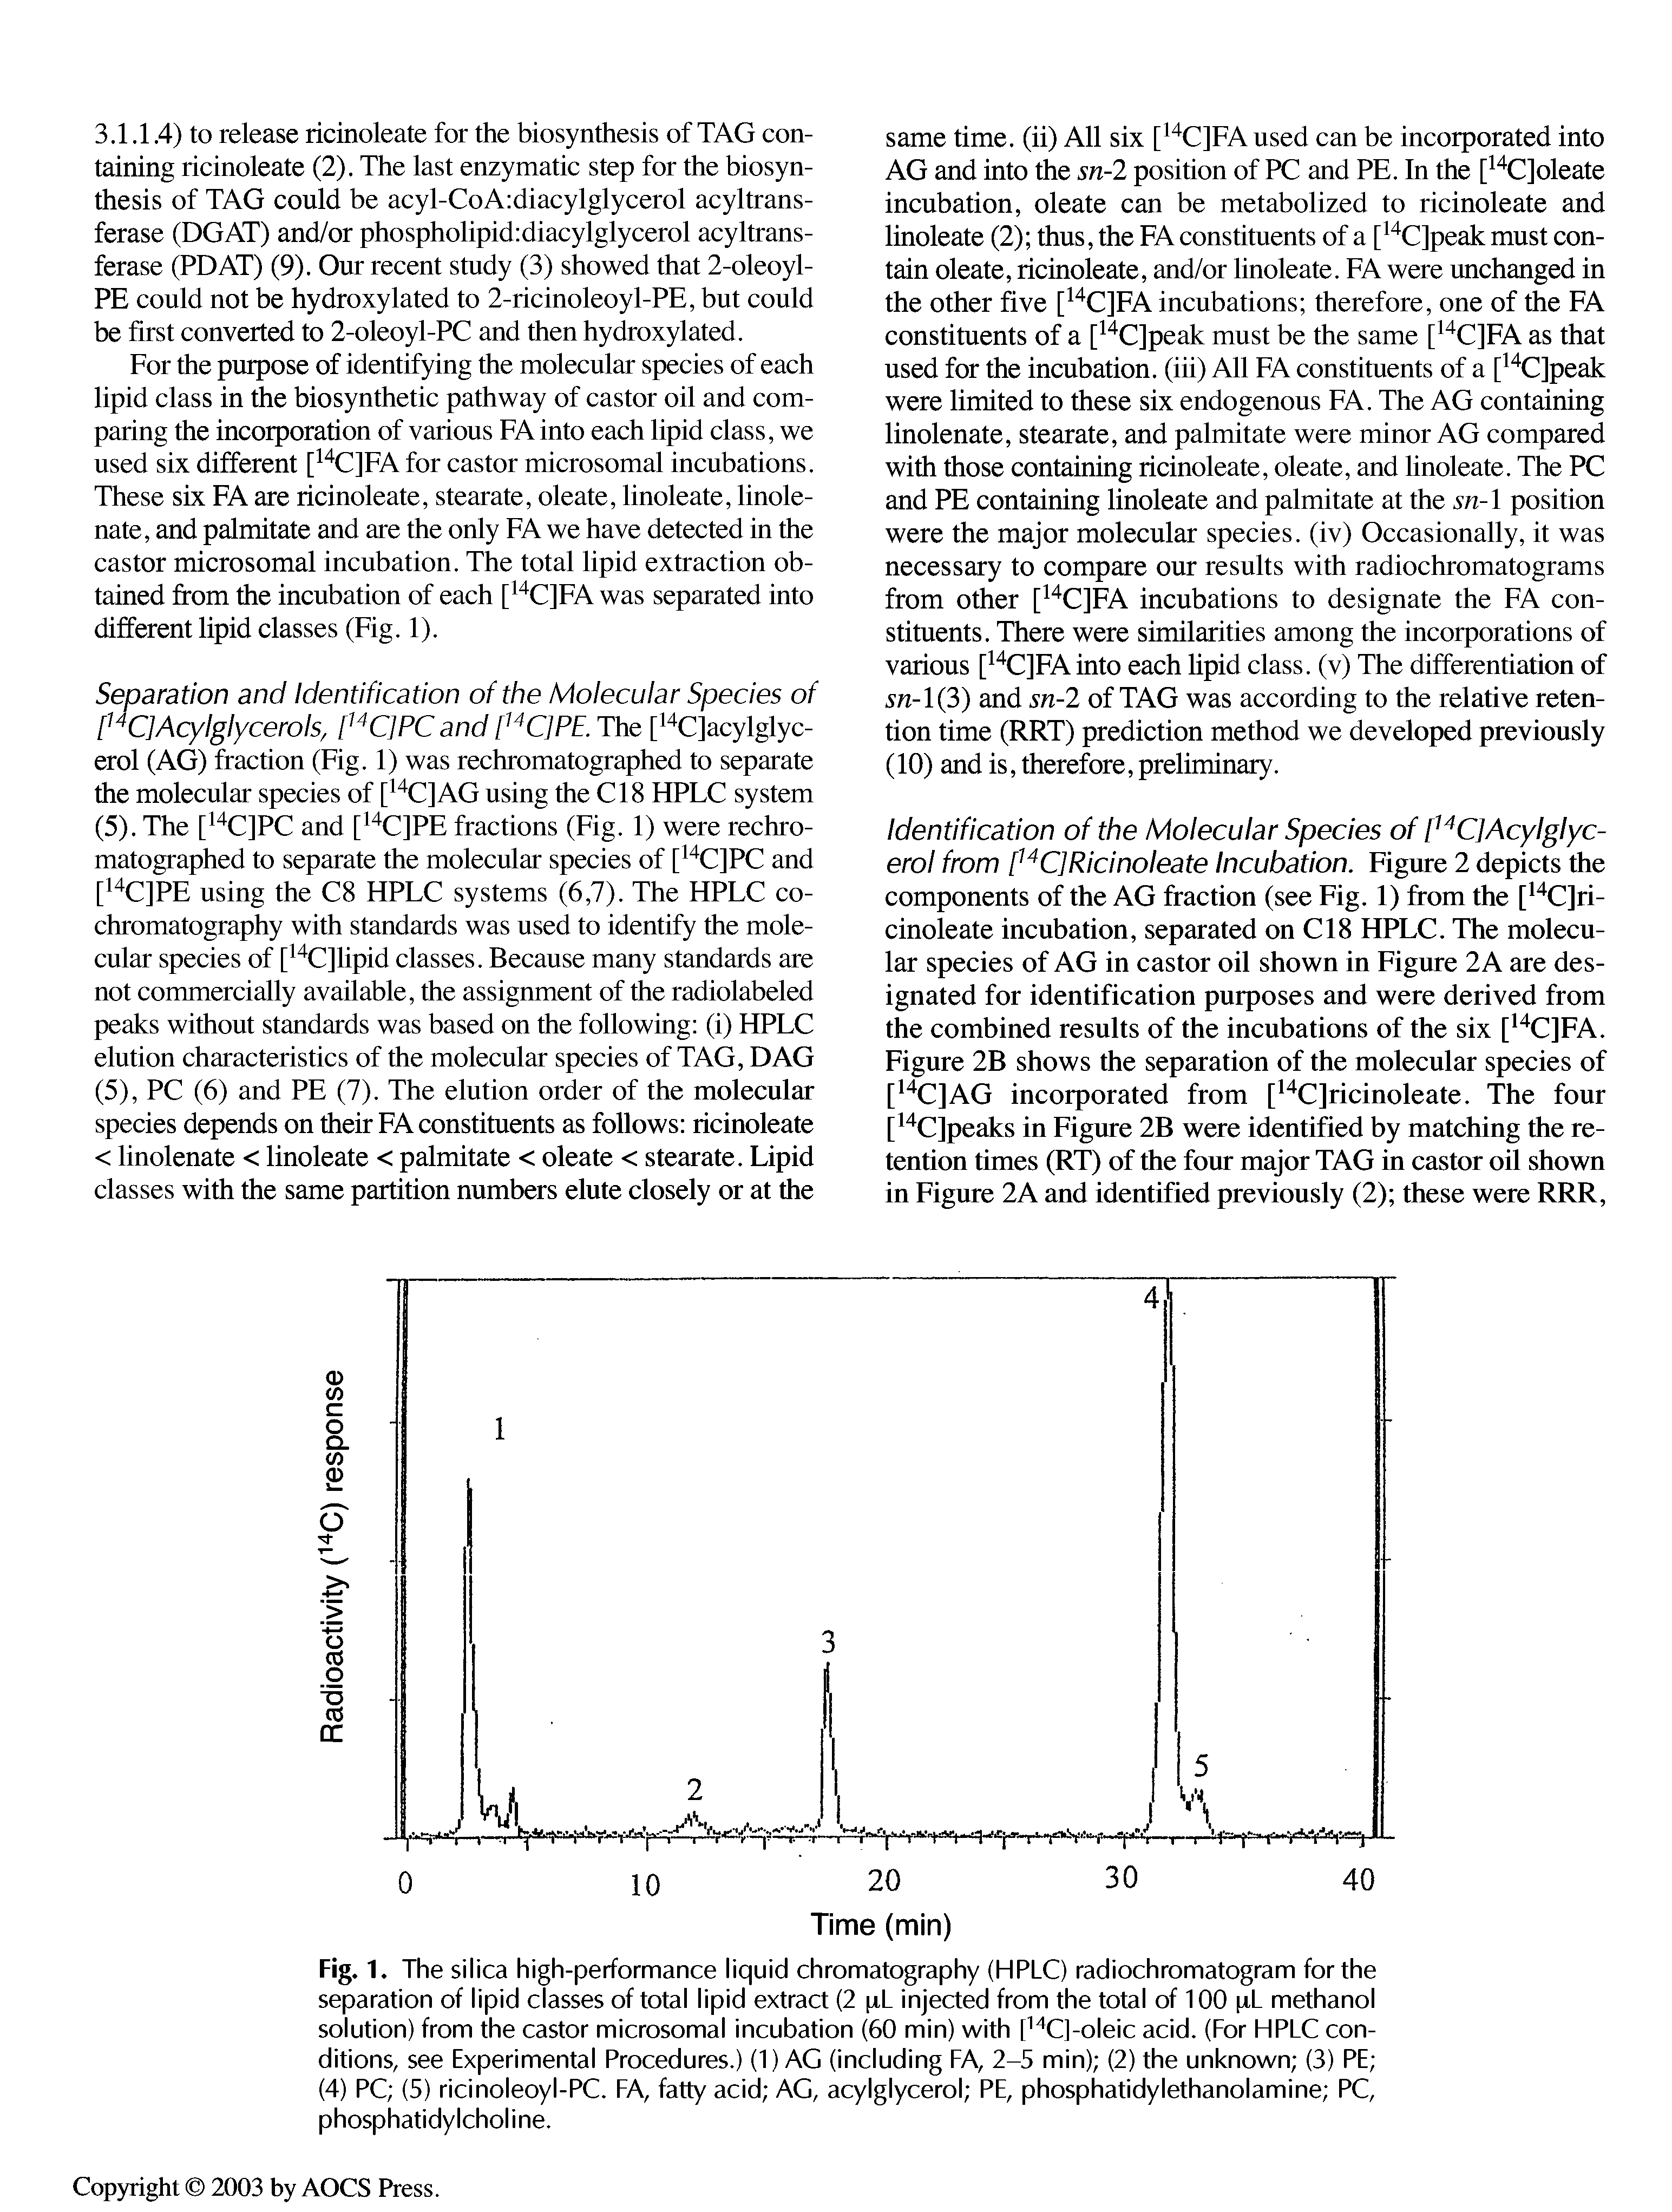 Fig. 1. The silica high-performance liquid chromatography (HPLC) radiochromatogram for the separation of lipid classes of total lipid extract (2 pL injected from the total of 100 pL methanol solution) from the castor microsomal incubation (60 min) with P" C]-oleic acid. (For HPLC conditions, see Experimental Procedures.) (1) AG (including FA, 2-5 min) (2) the unknown (3) PE (4) PC (5) ricinoleoyl-PC. FA, fatty acid AG, acylglycerol PE, phosphatidylethanolamine PC, phosphatidylcholine.